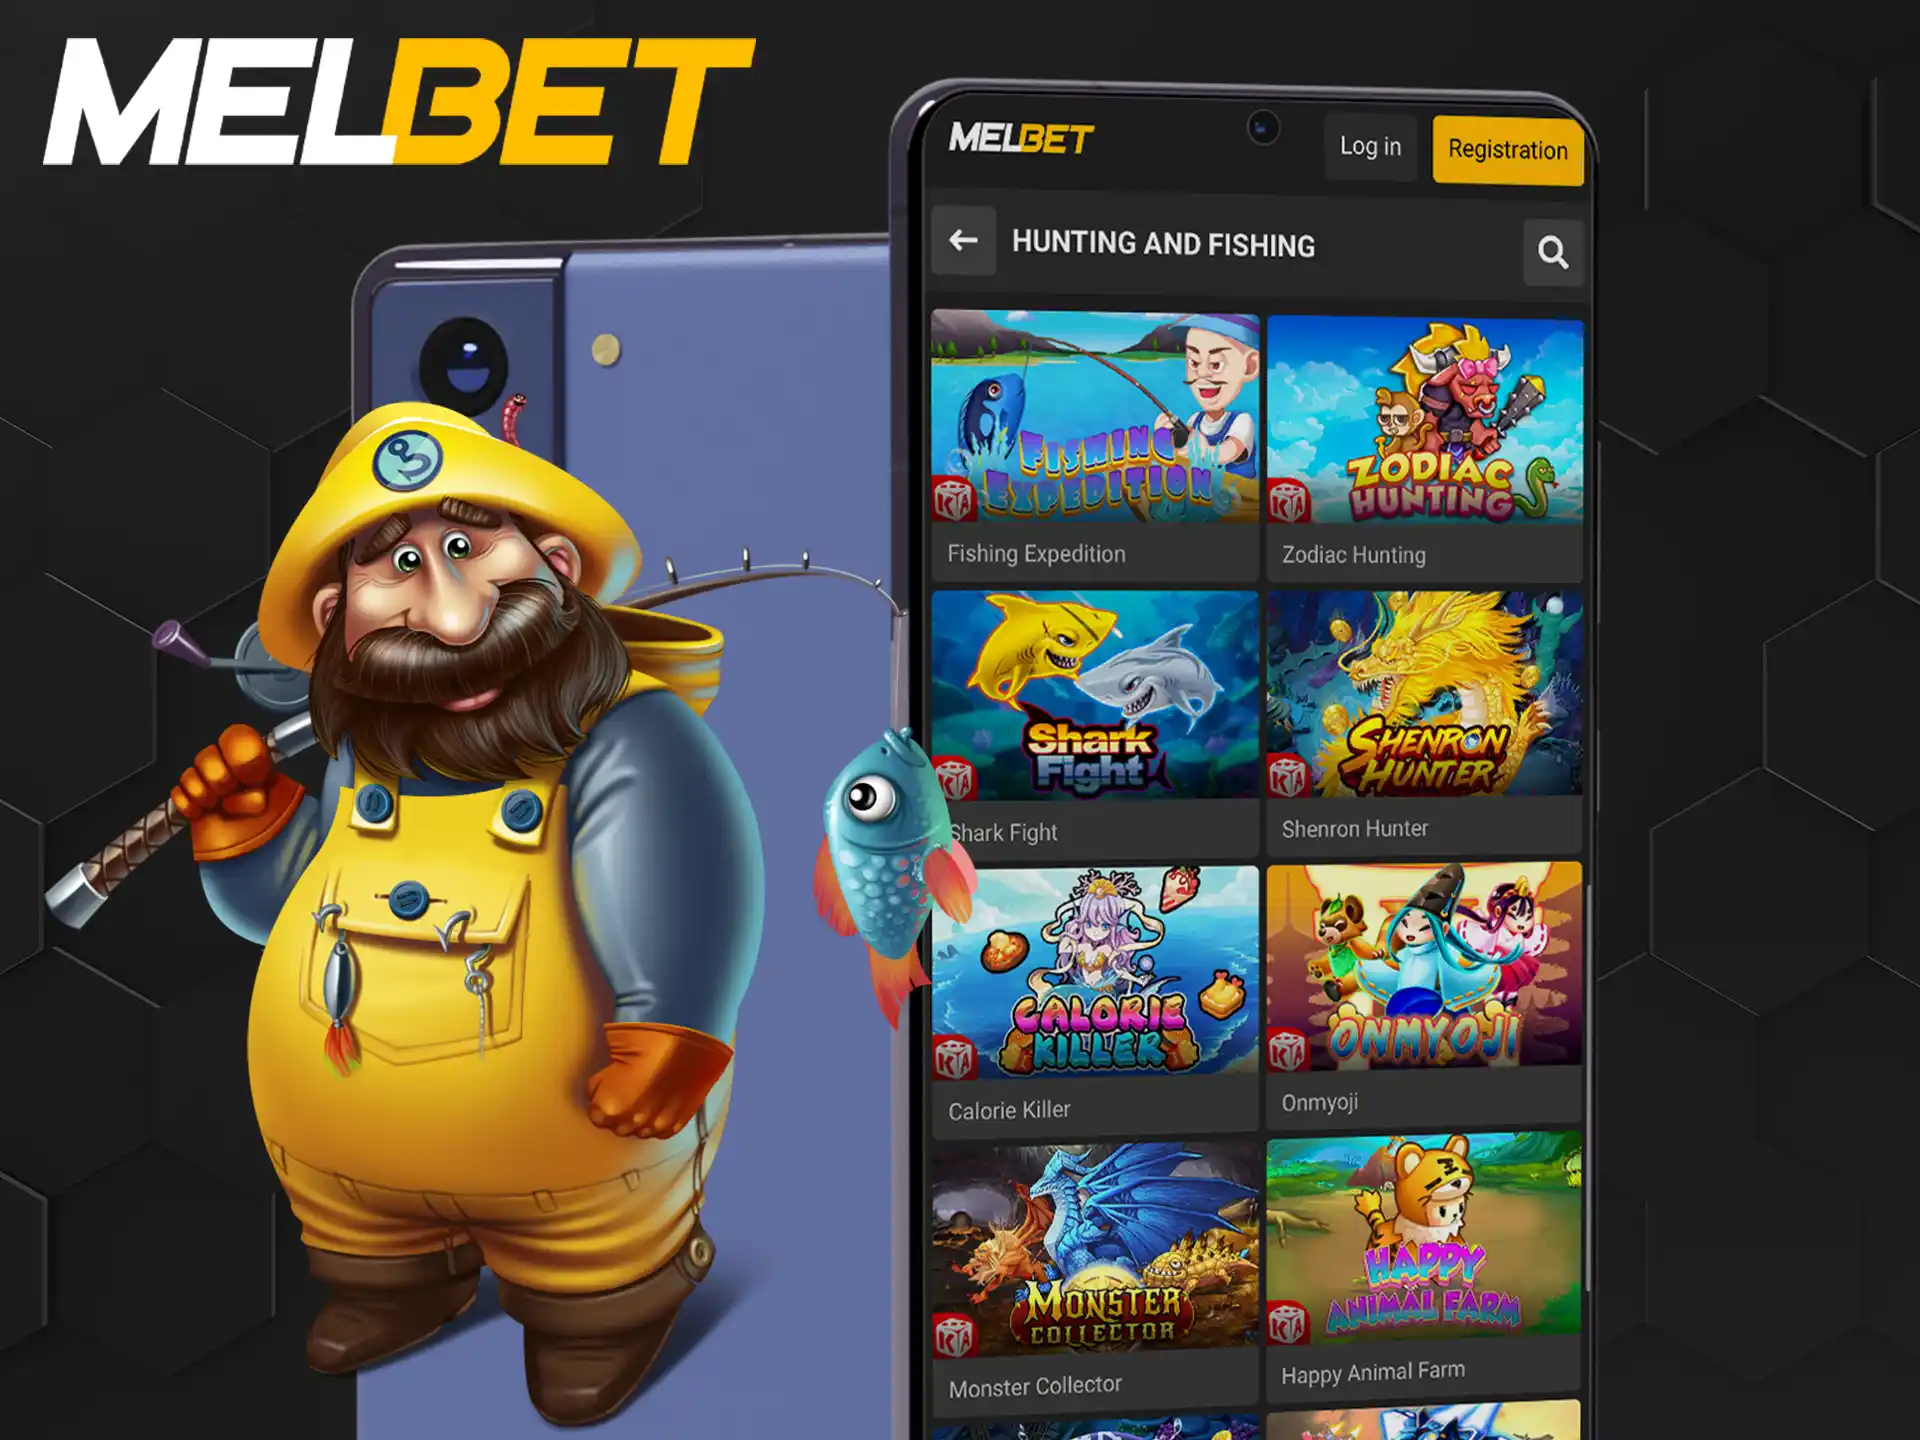 Play lots of other games and check out Melbet's affiliate program.